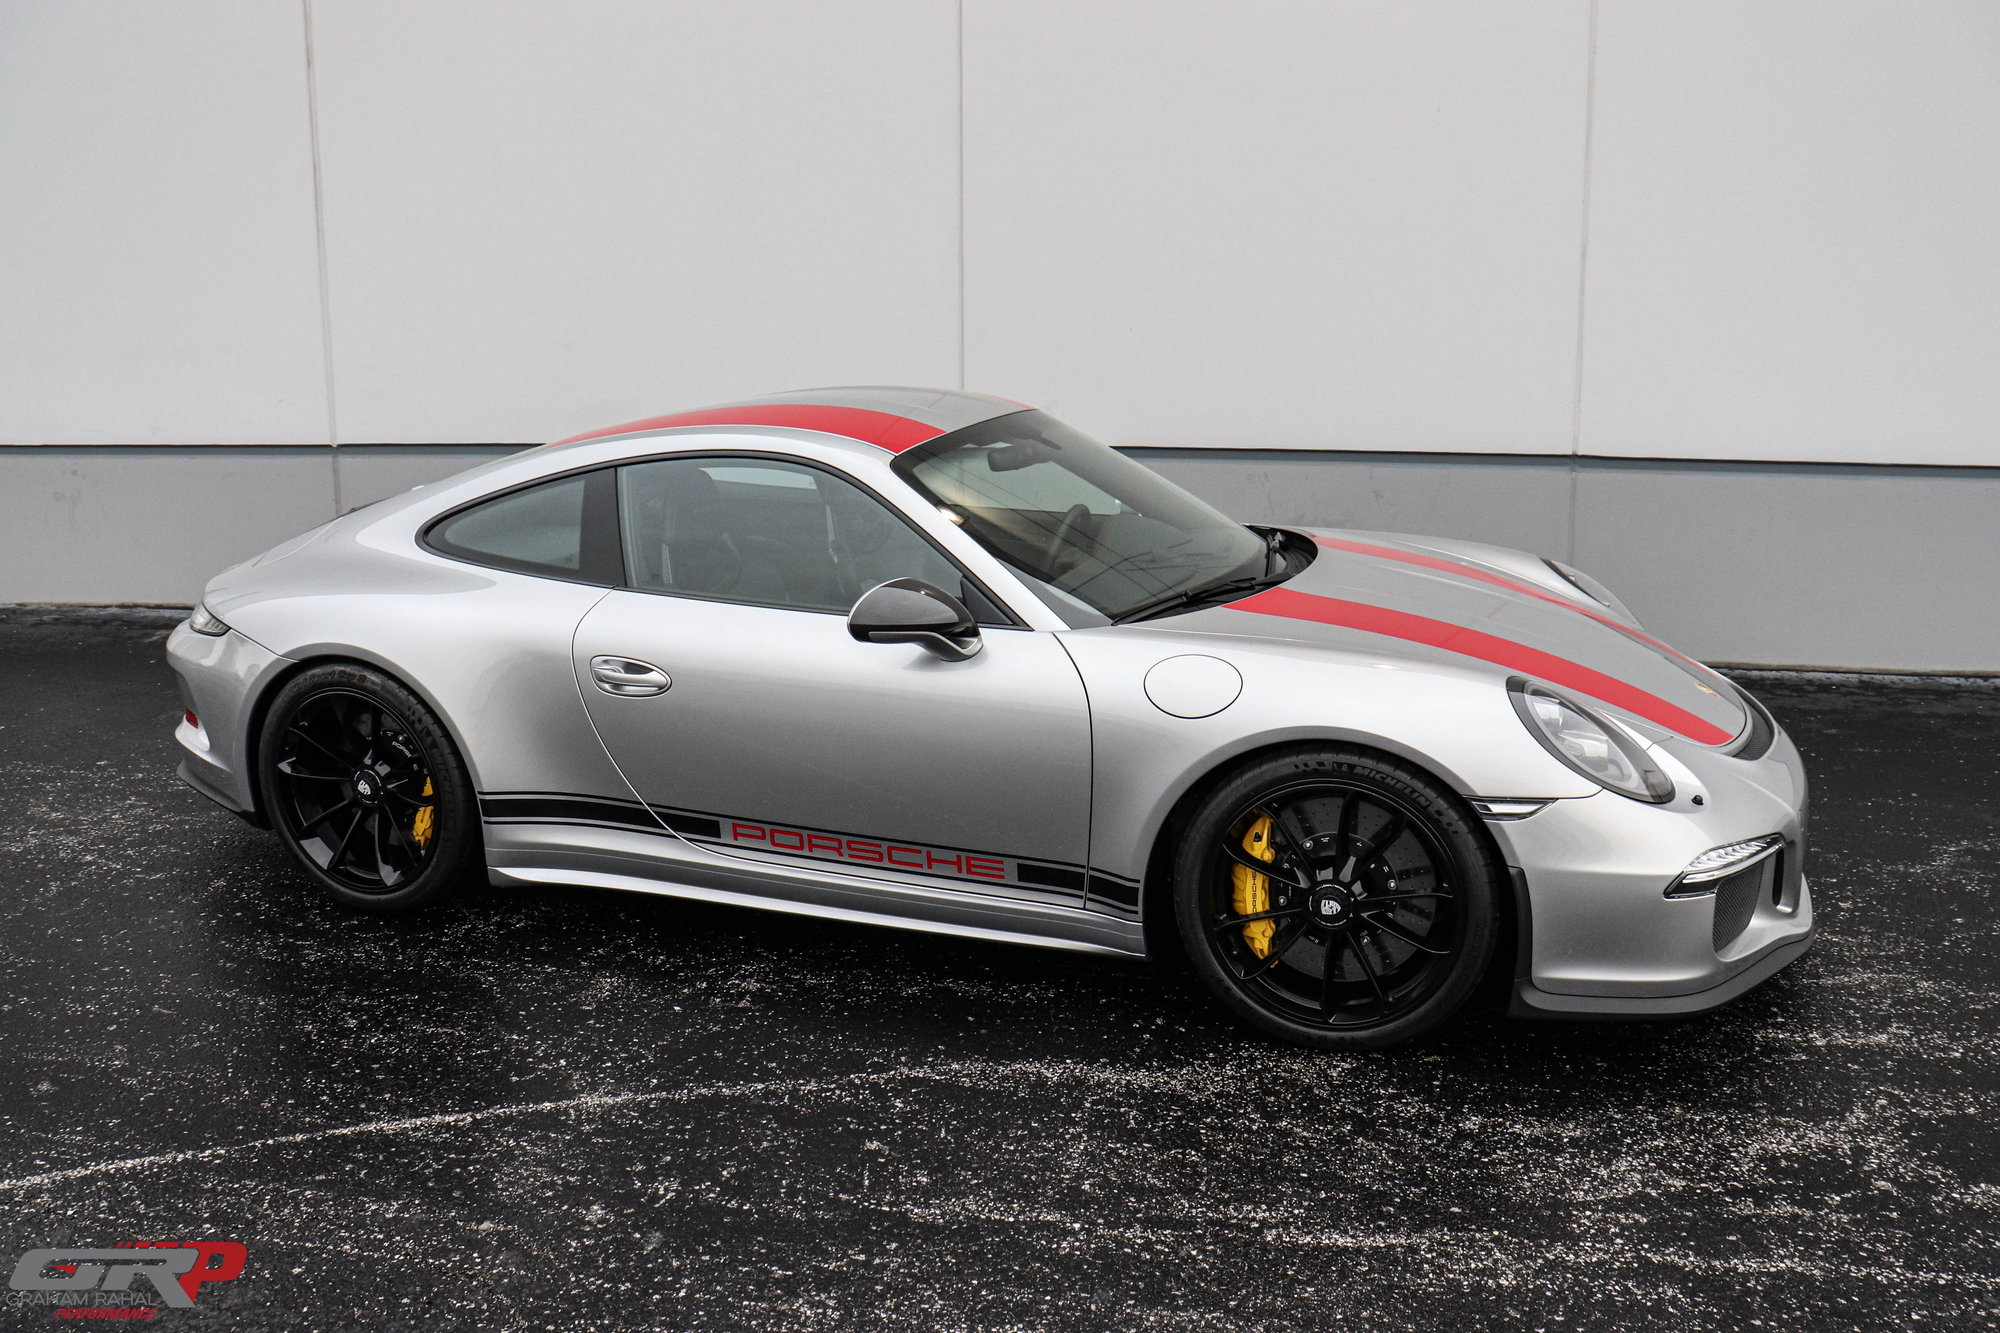 2016 Porsche 911 - 2016 Porsche 911R - CPO - Delivery Miles - Used - VIN WP0AF2A94GS195286 - 37 Miles - 6 cyl - 2WD - Manual - Coupe - Silver - Brownsburg, IN 46112, United States